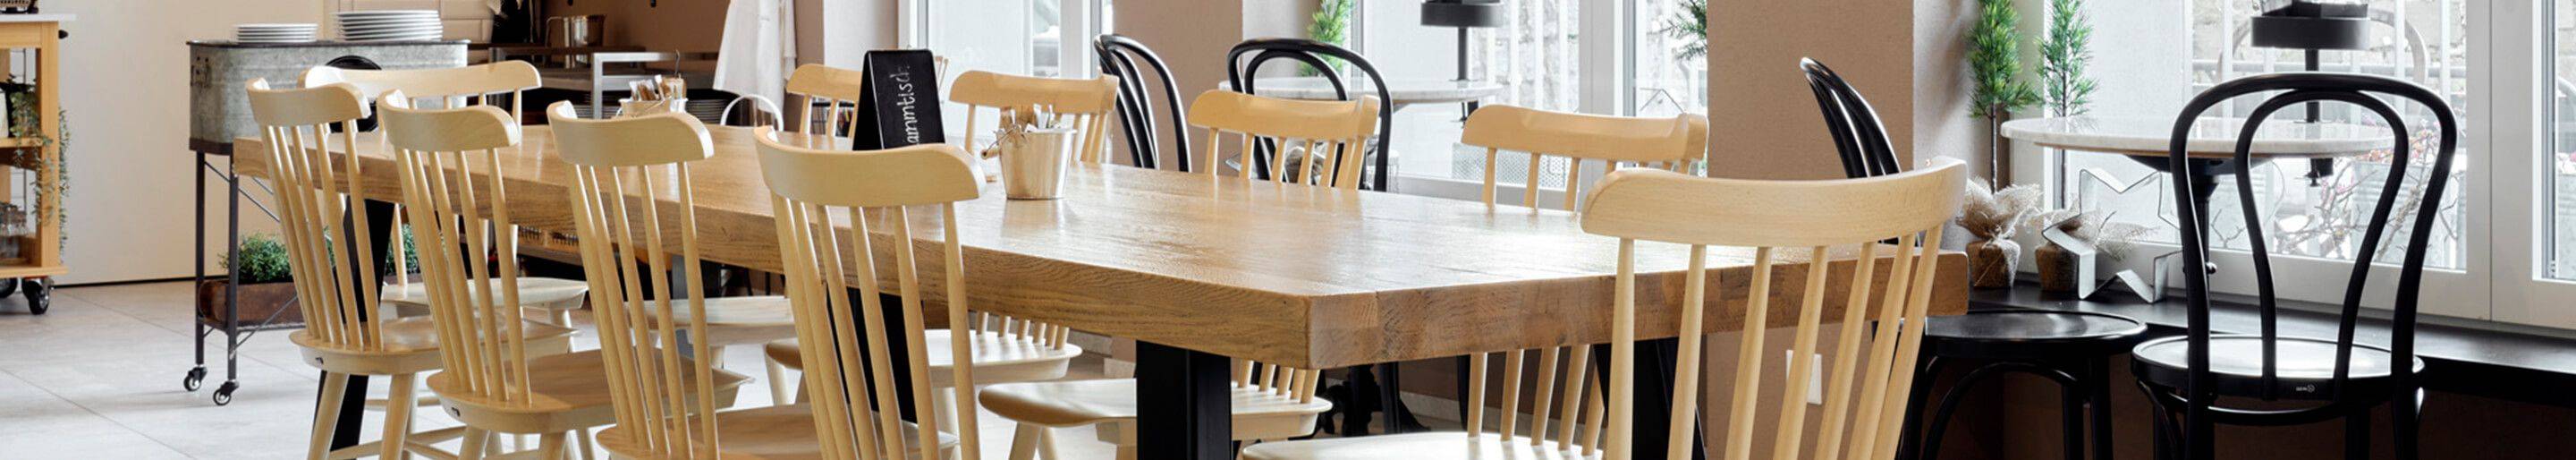 Indoor Wooden chairs for your restaurant or hotel